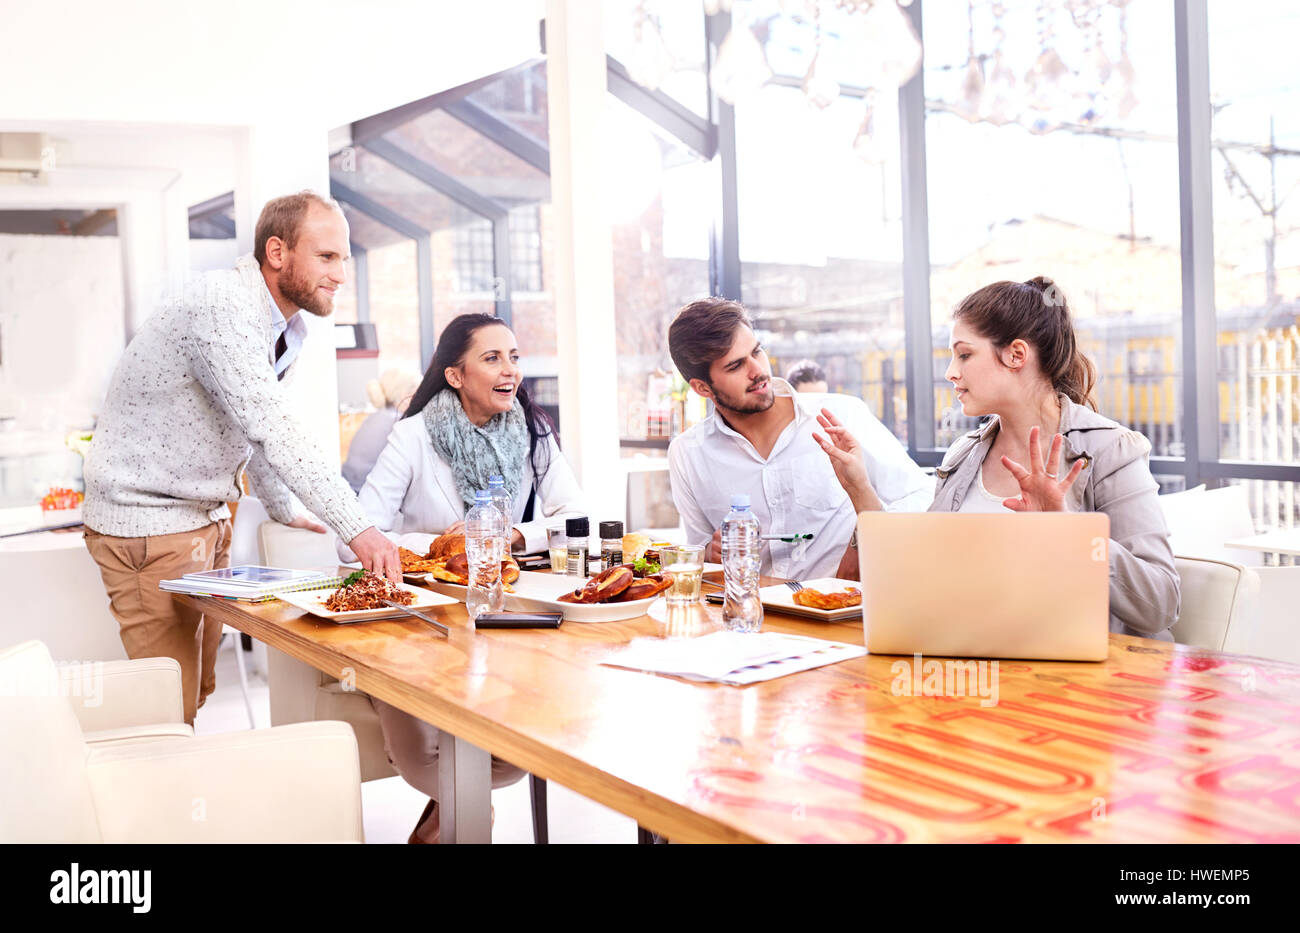 Businesswoman explaining to business team during working lunch in restaurant Stock Photo